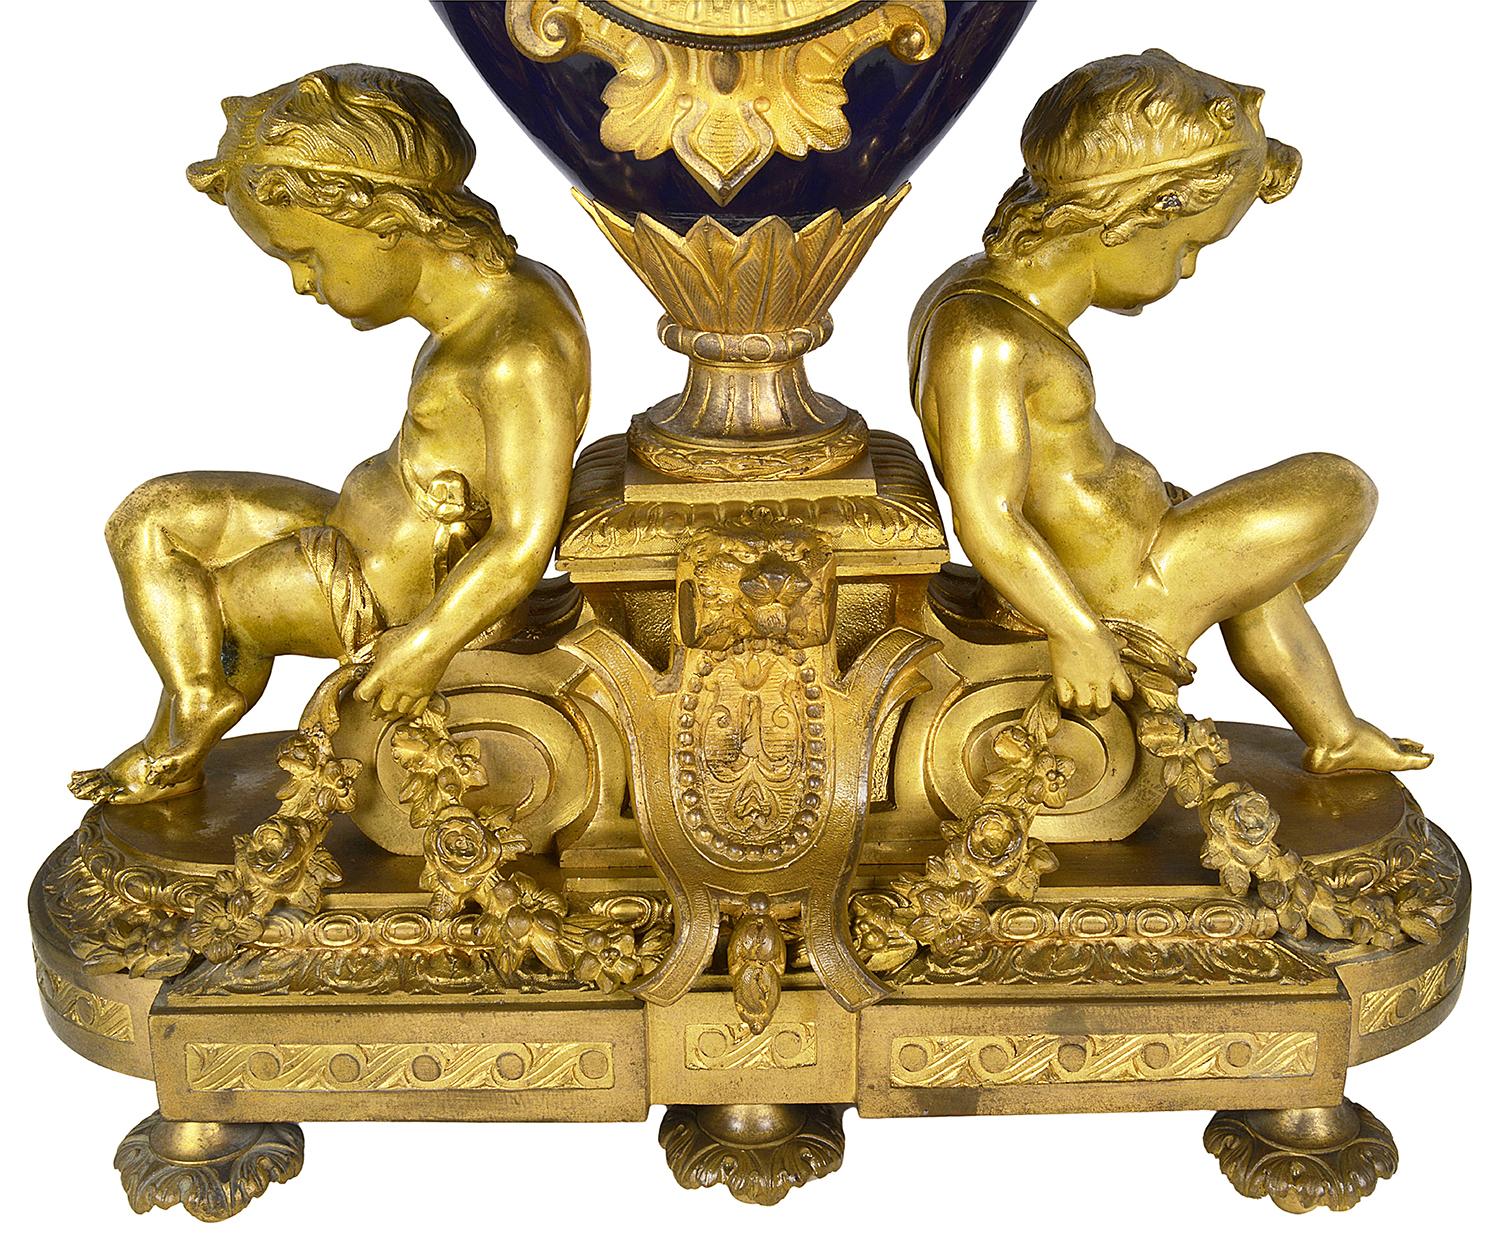 A very impressive late 19th century French gilded ormolu and cobalt blue porcelain urn clock set, the clock having seated putti holding garlands of flowers, the clock movement having an eight day duration that strikes on the hour and half hour. Lion